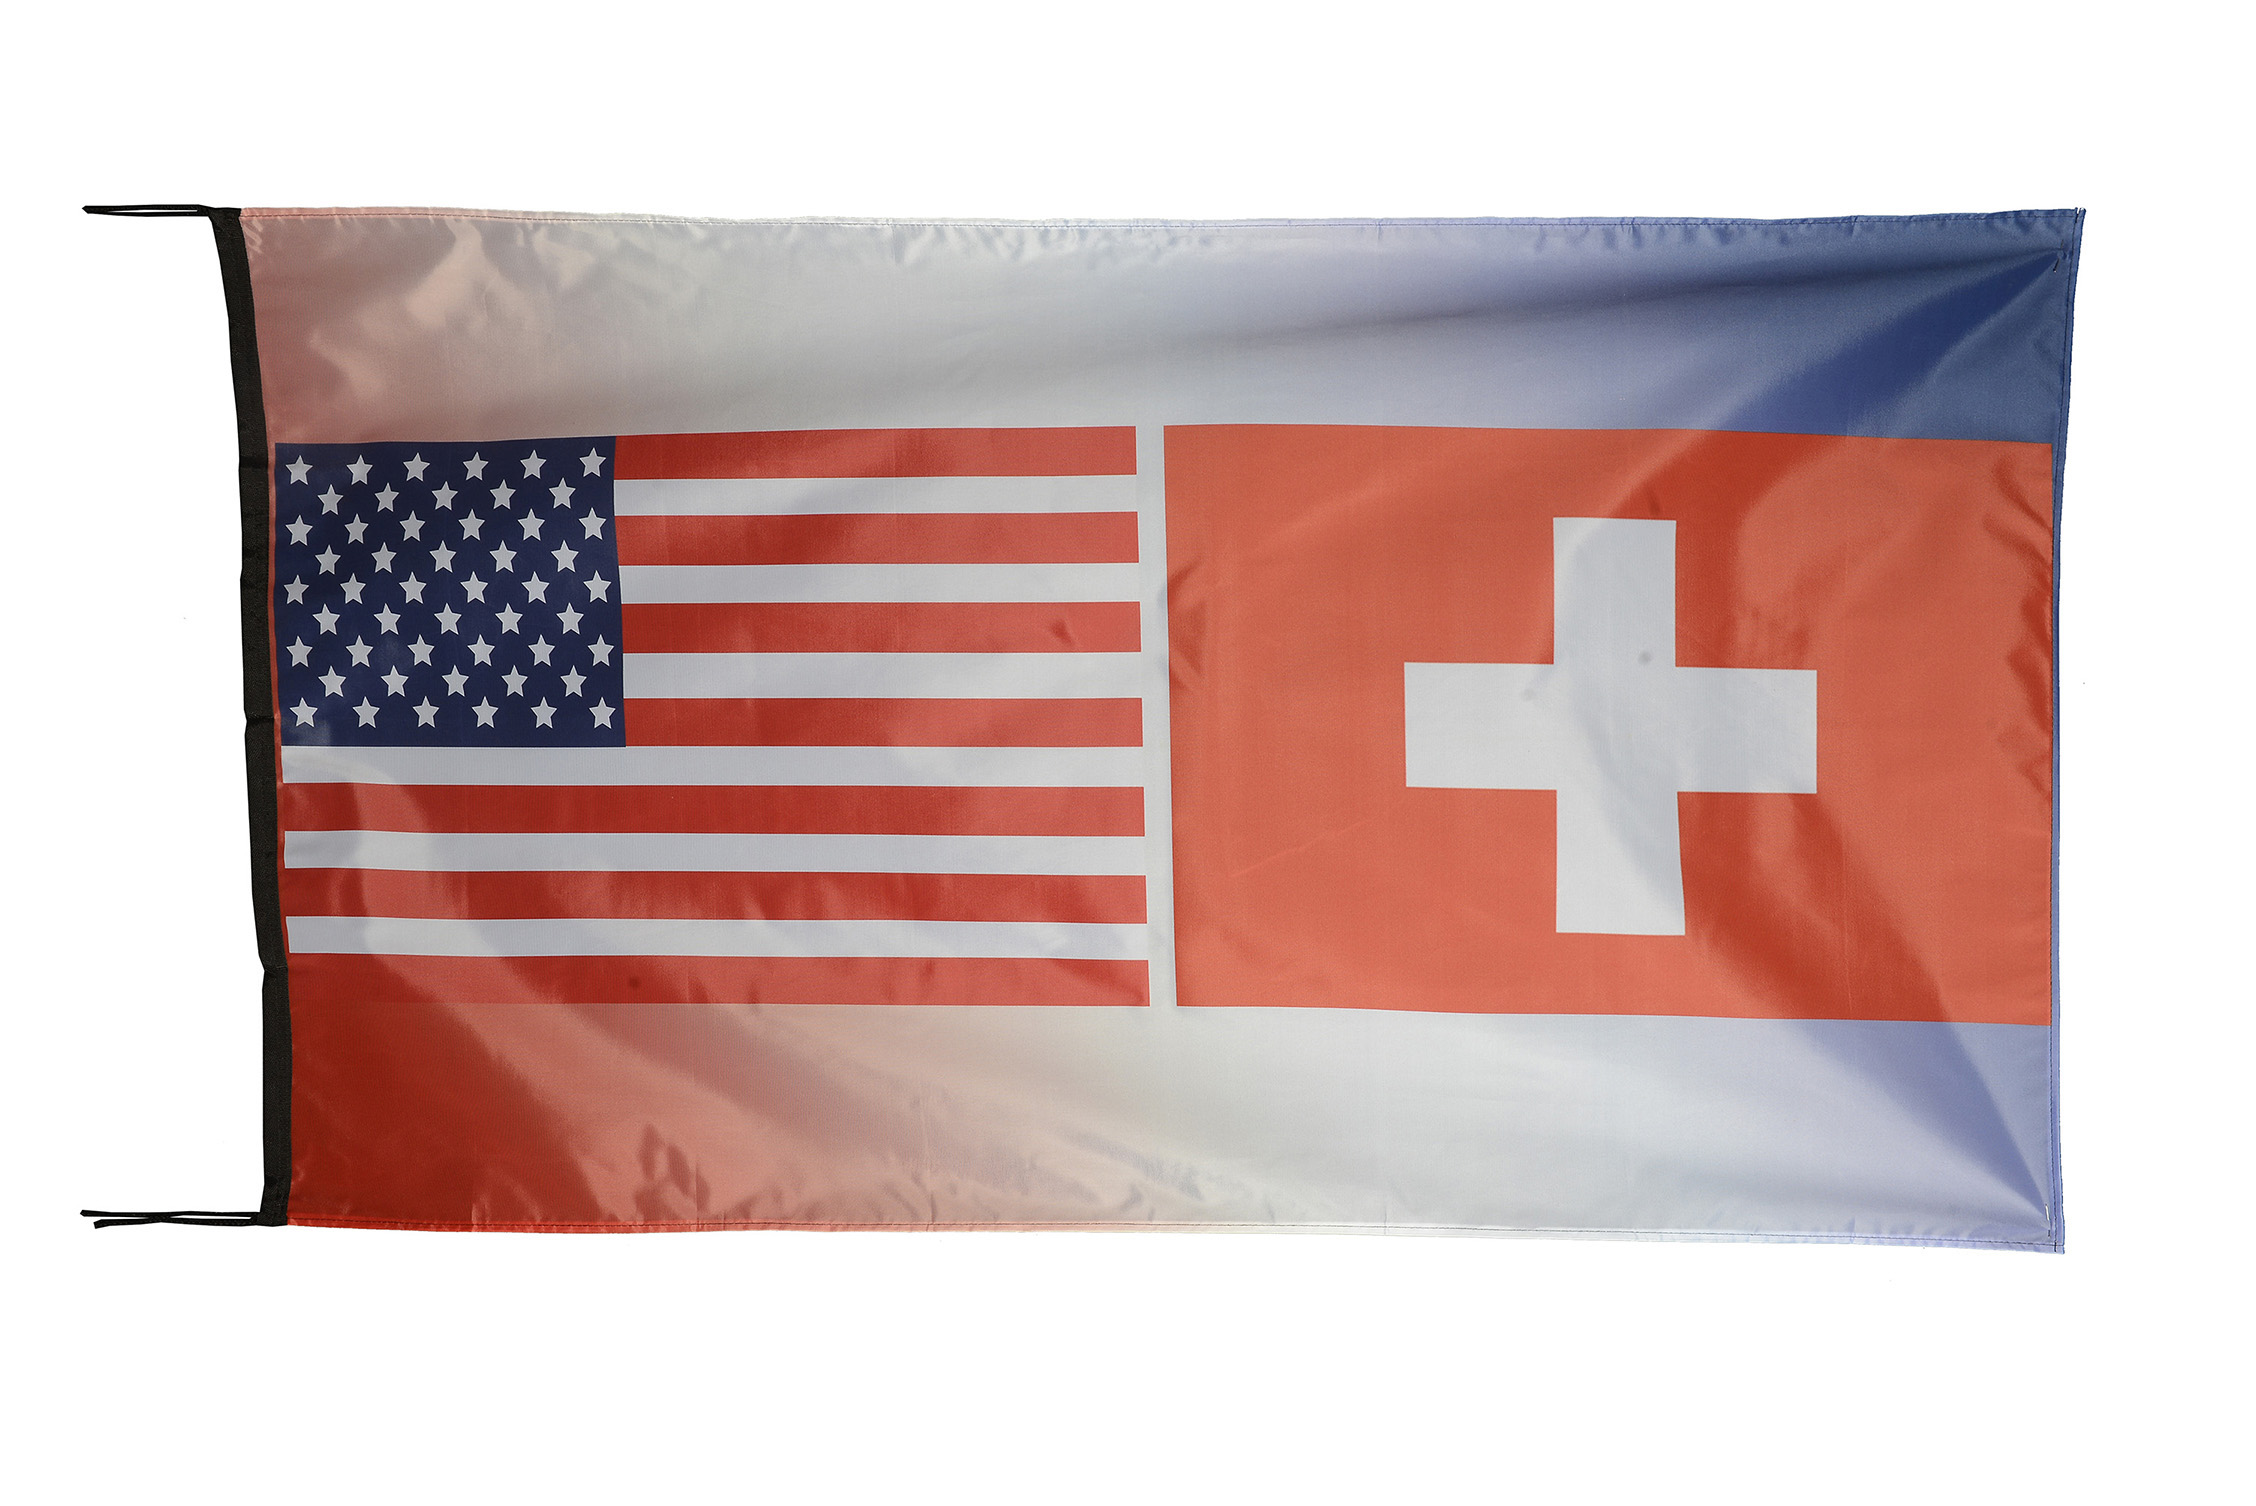 Flag  141 USA / US Country / United States Of America and Switzerland (Swiss Flag) / Patriotic / Pride Hybrid Weather-Resistant Polyester Outdoor Flag Landscape Banner / Vivid Colors / 3 X 5 FT (150 x 90cm) International Flags for Sale